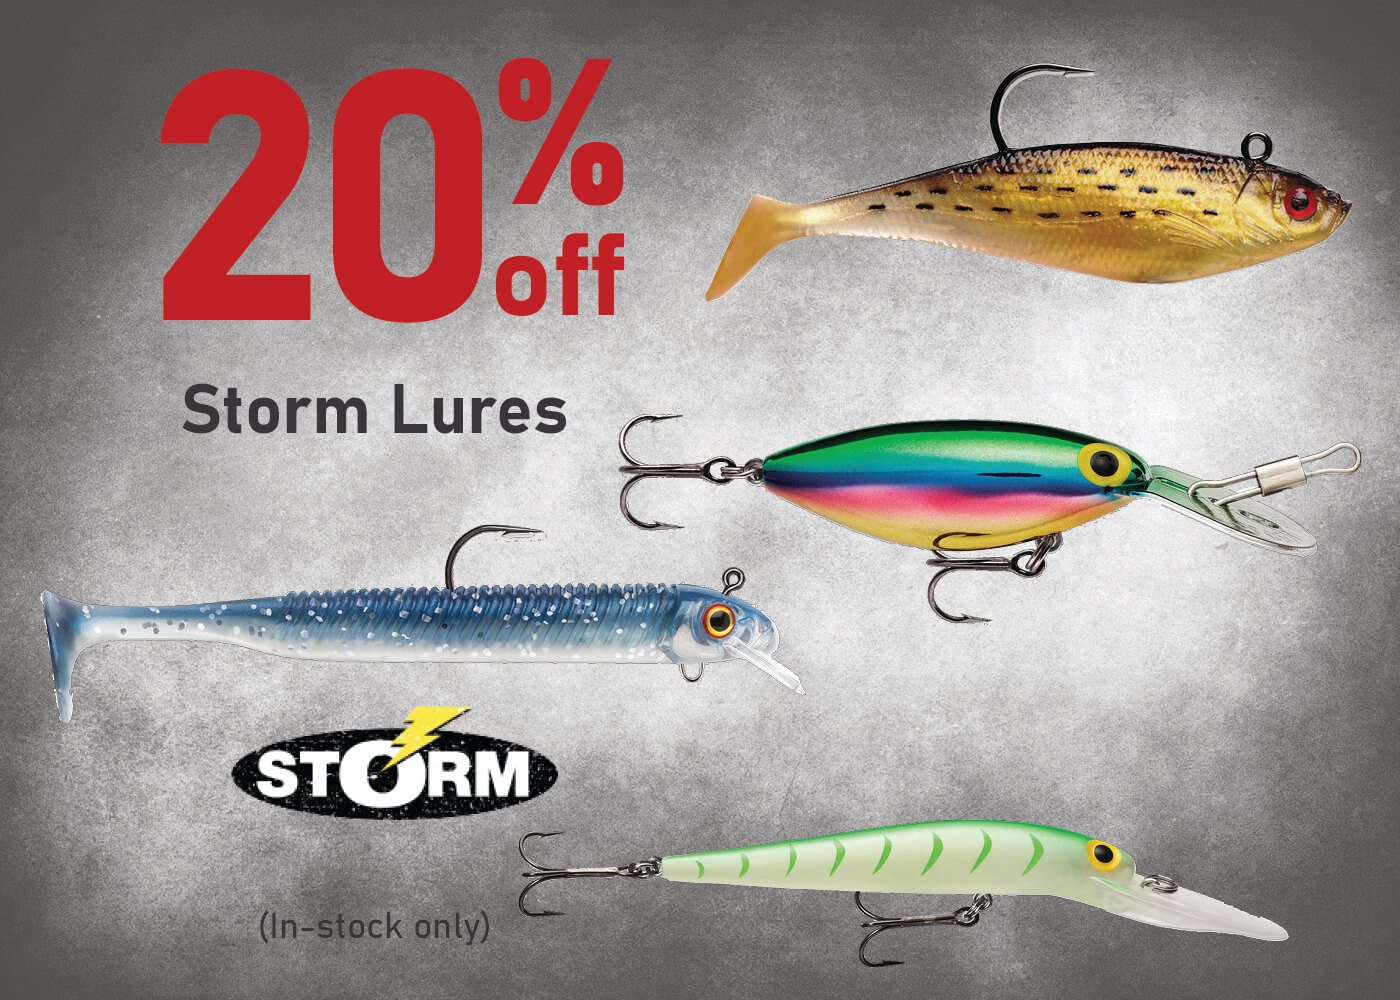 Take 20% off Storm Lures